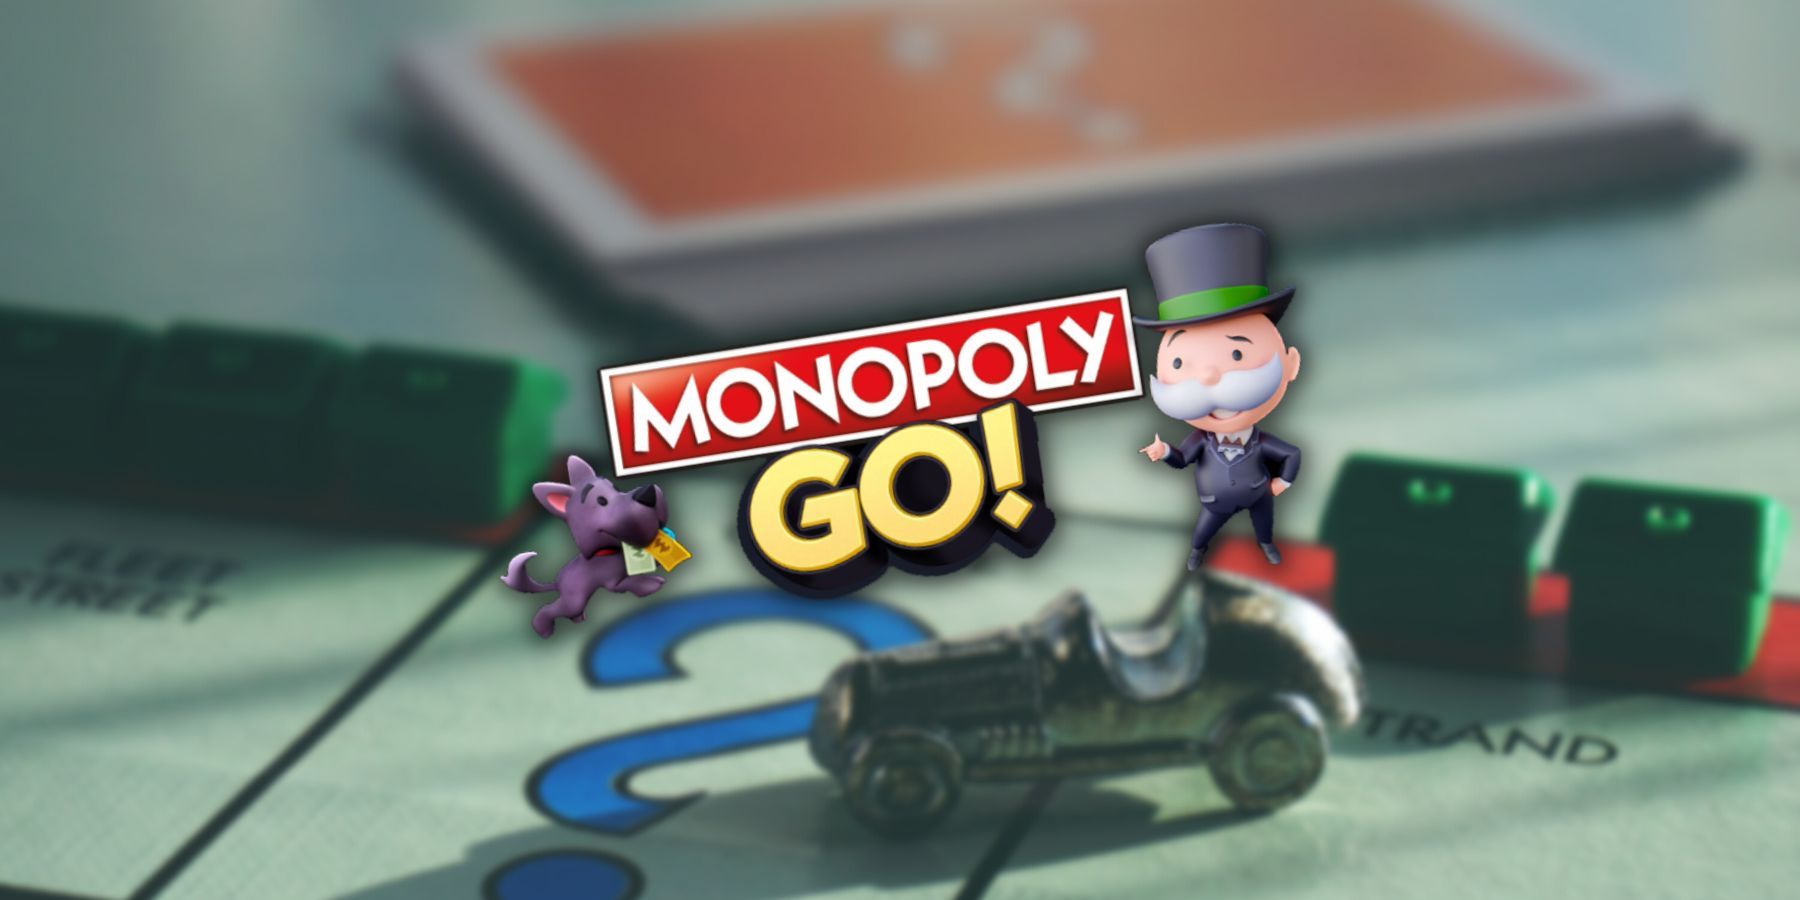 Milburn Pennybags and a dog standing beside a Monopoly GO logo